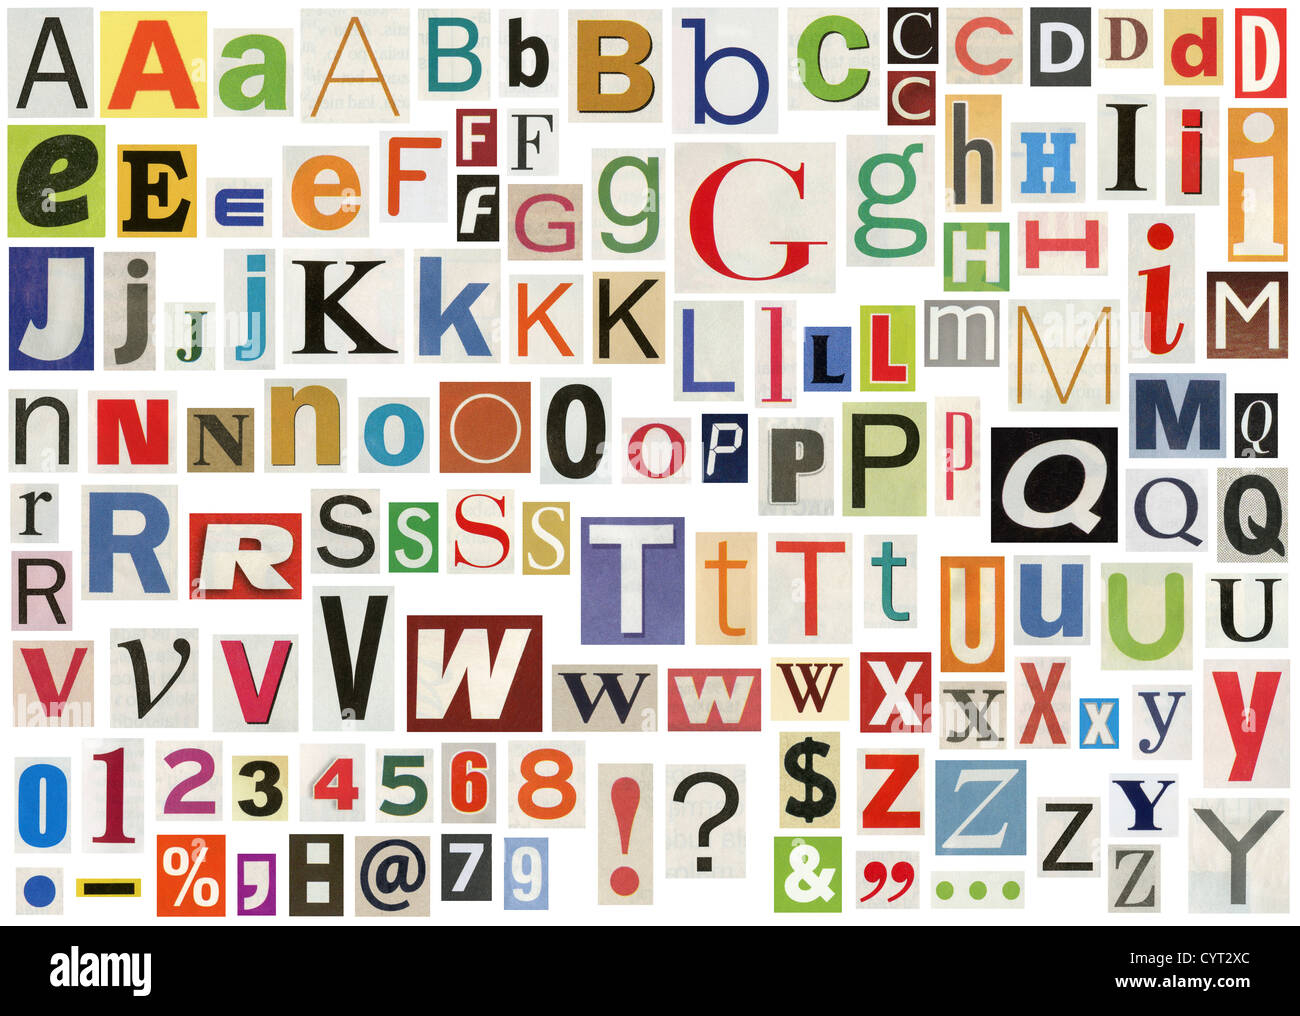 Cut Newspaper Magazine Letters Numbers High Resolution Stock Photography And Images Alamy